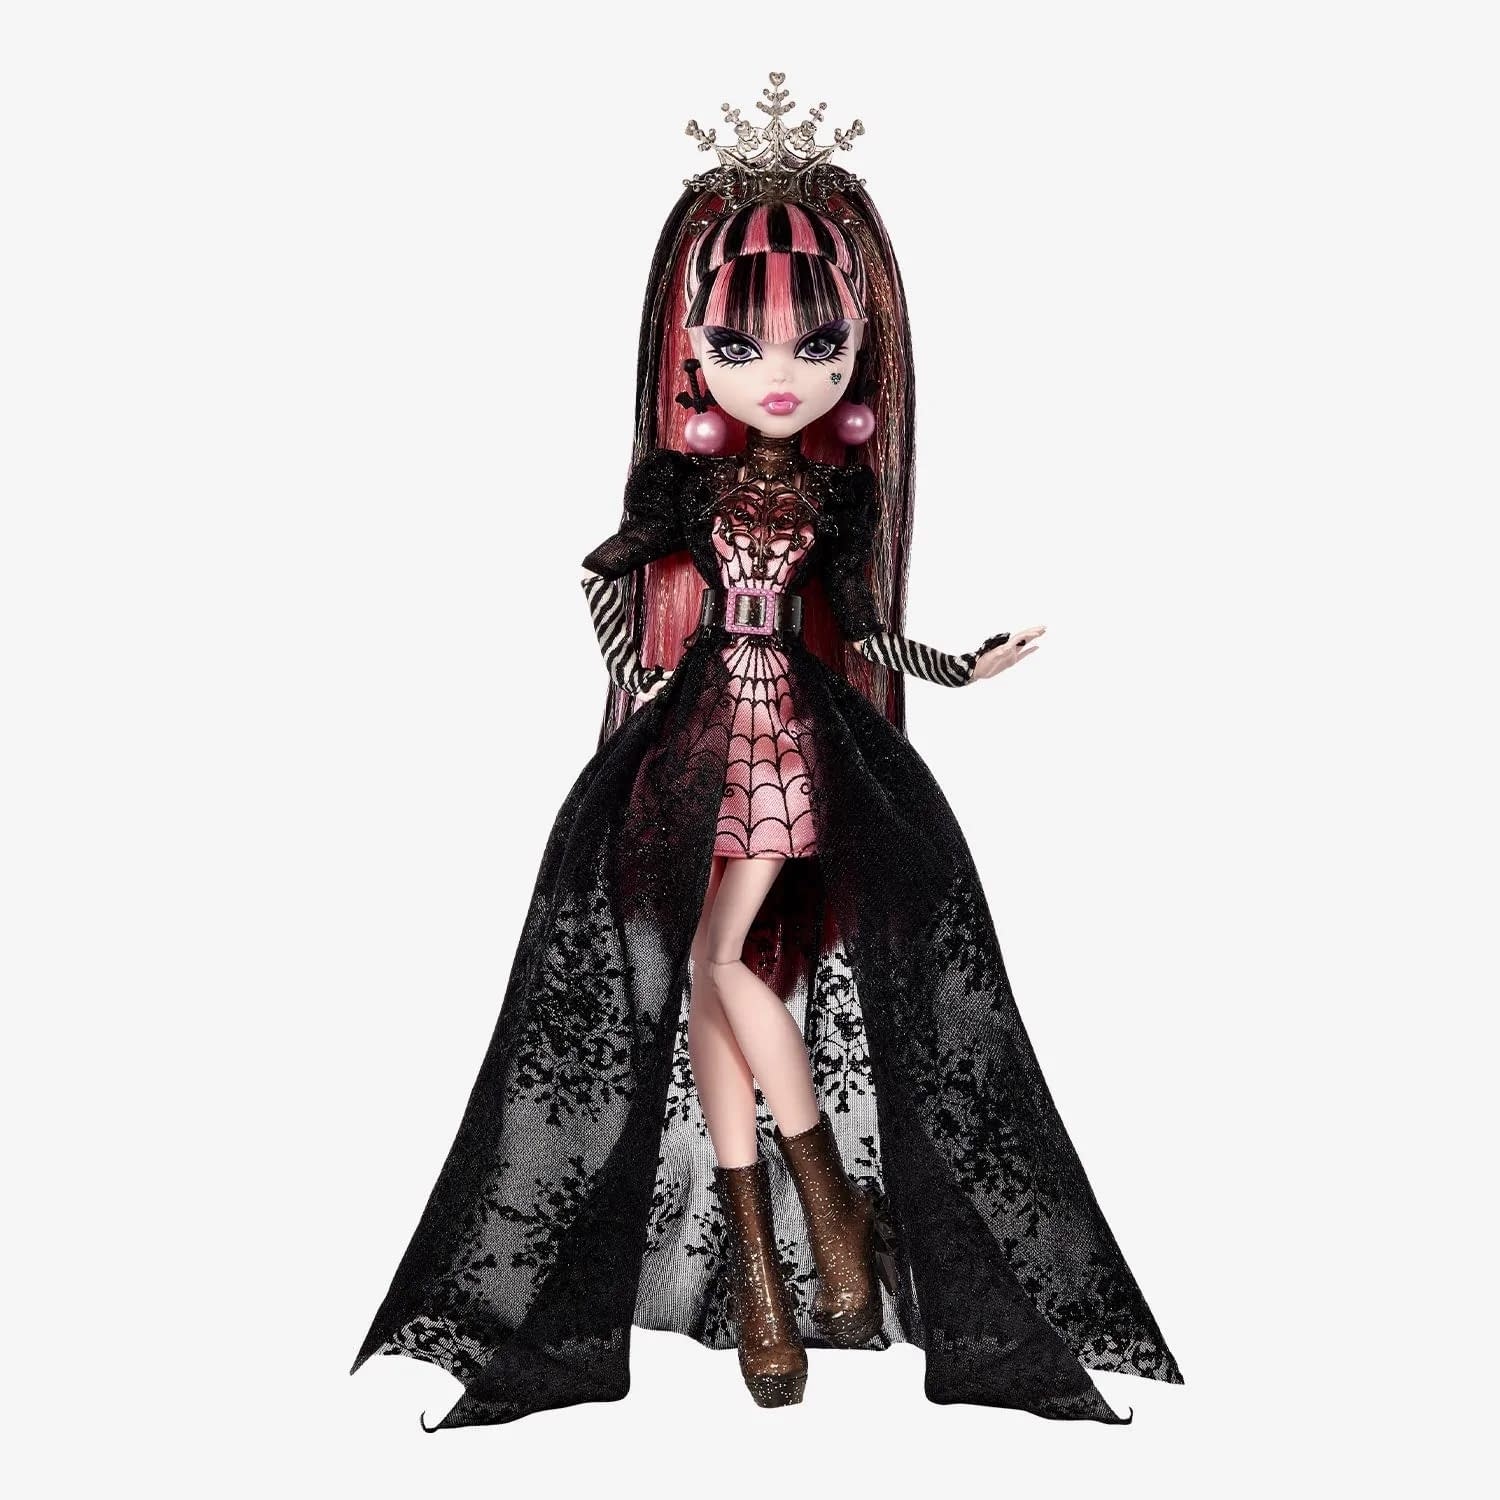 It's Season's Screamings with the Monster High Howliday Draculaura 